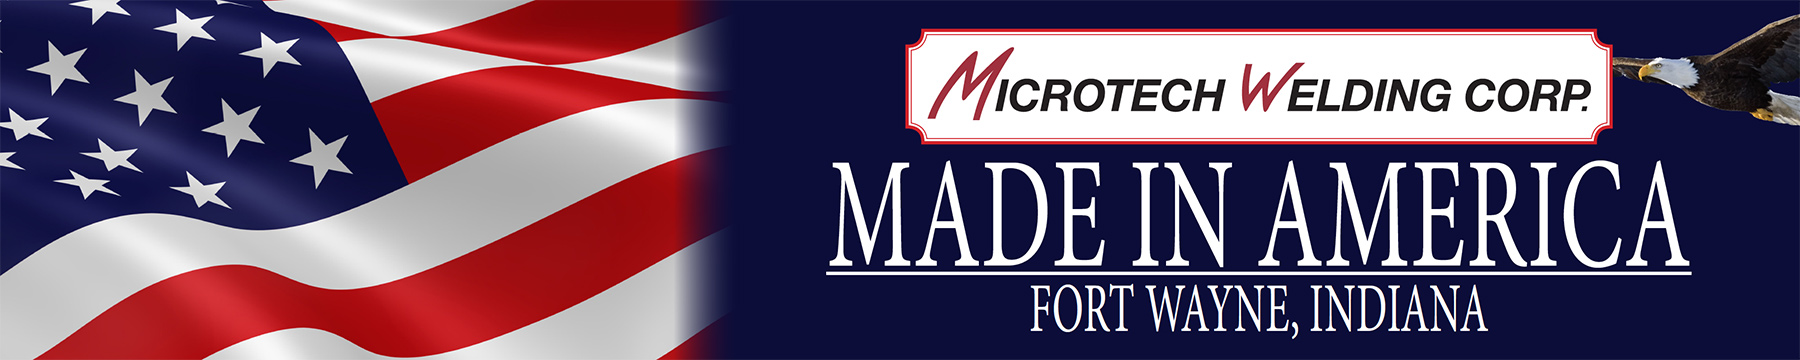 Microtech Welding Corp - Made in America - Fort Wayne, IN